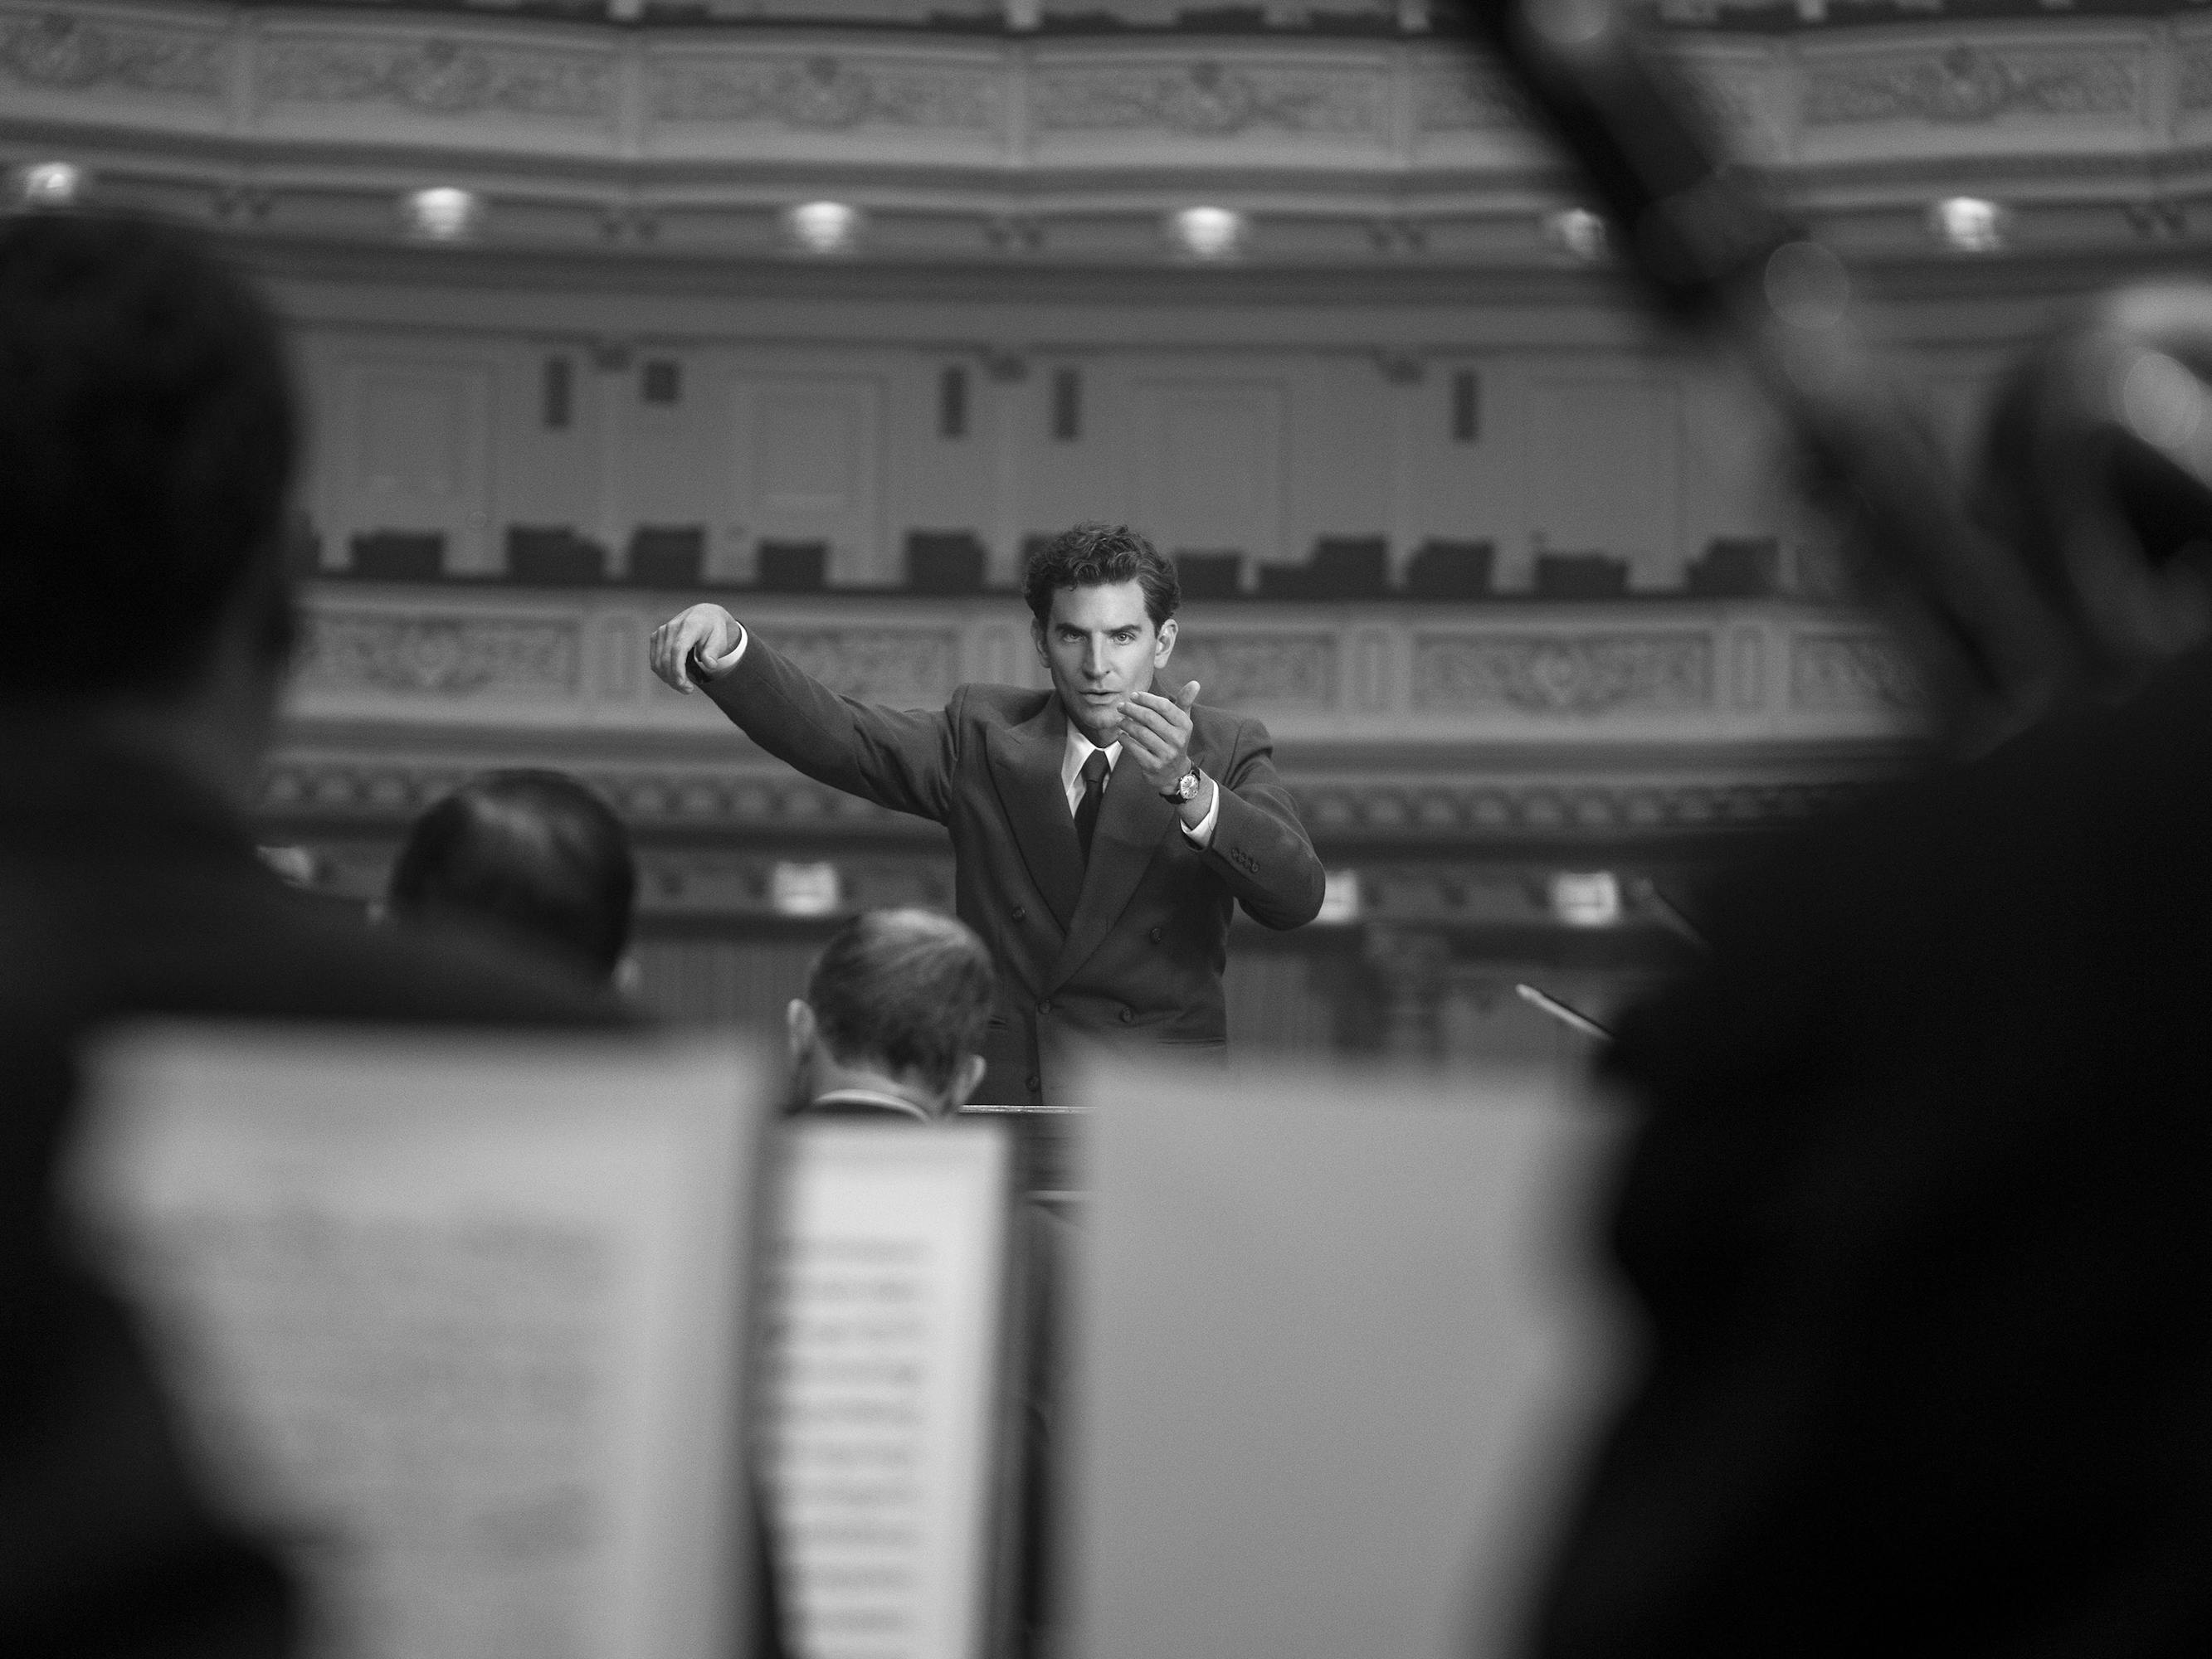 Leonard Bernstein (Bradley Cooper) conducts an orchestra with an intense expression on his face. 